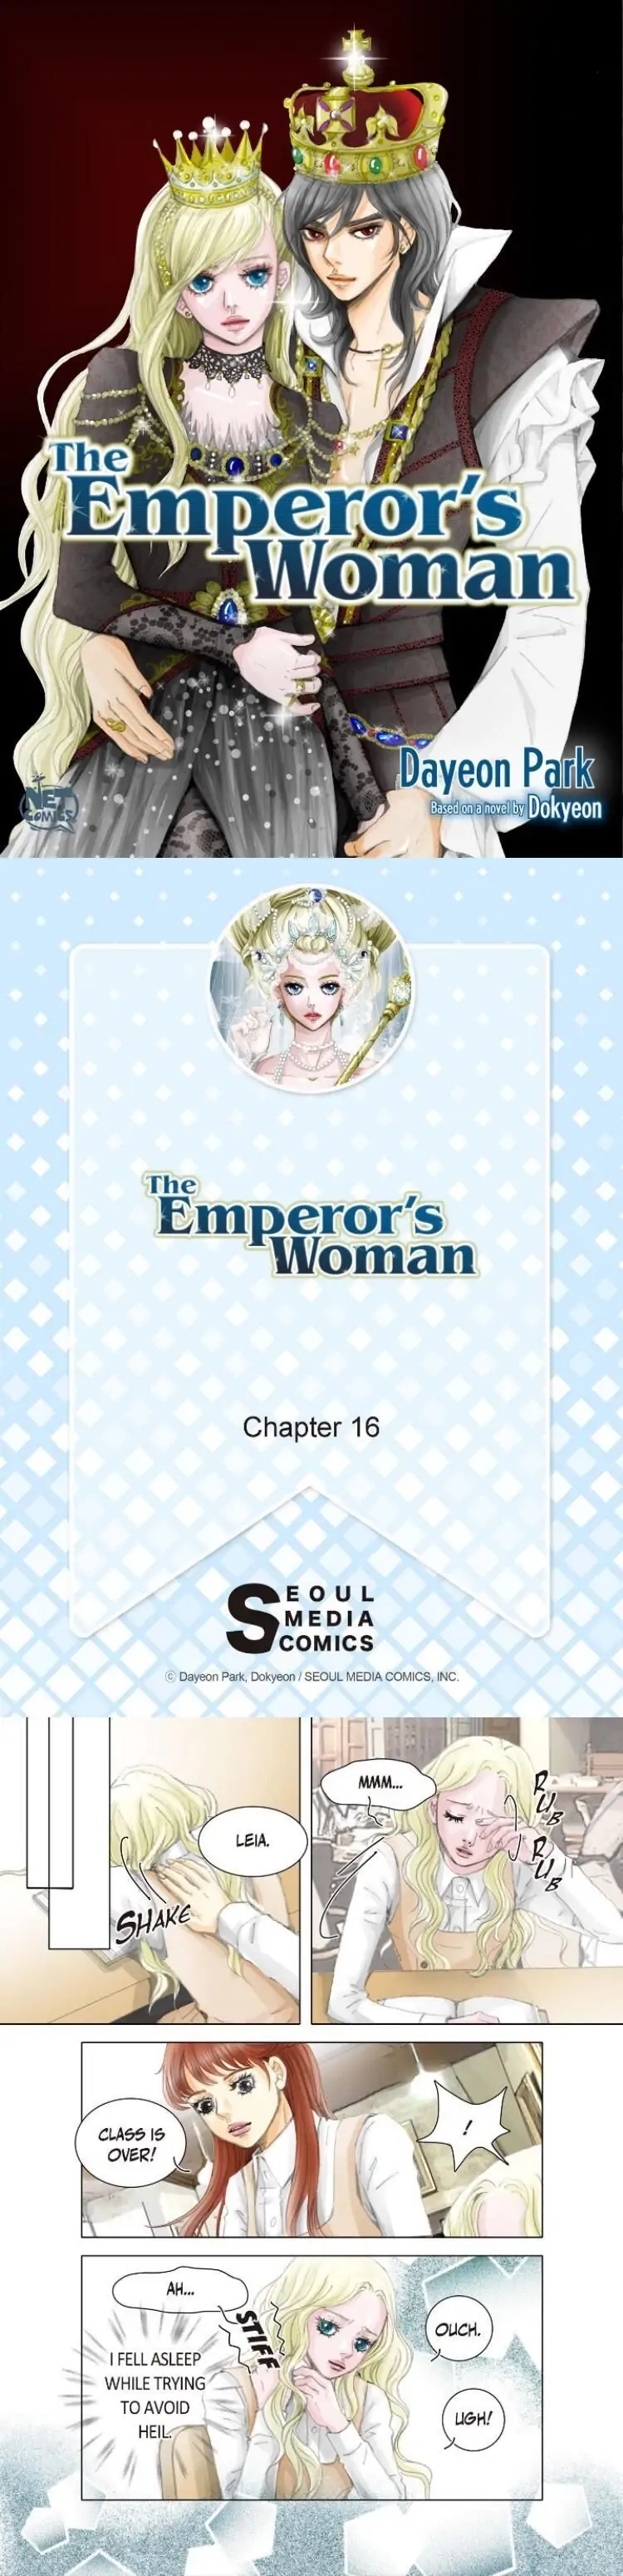 The Emperor’s Woman chapter 16